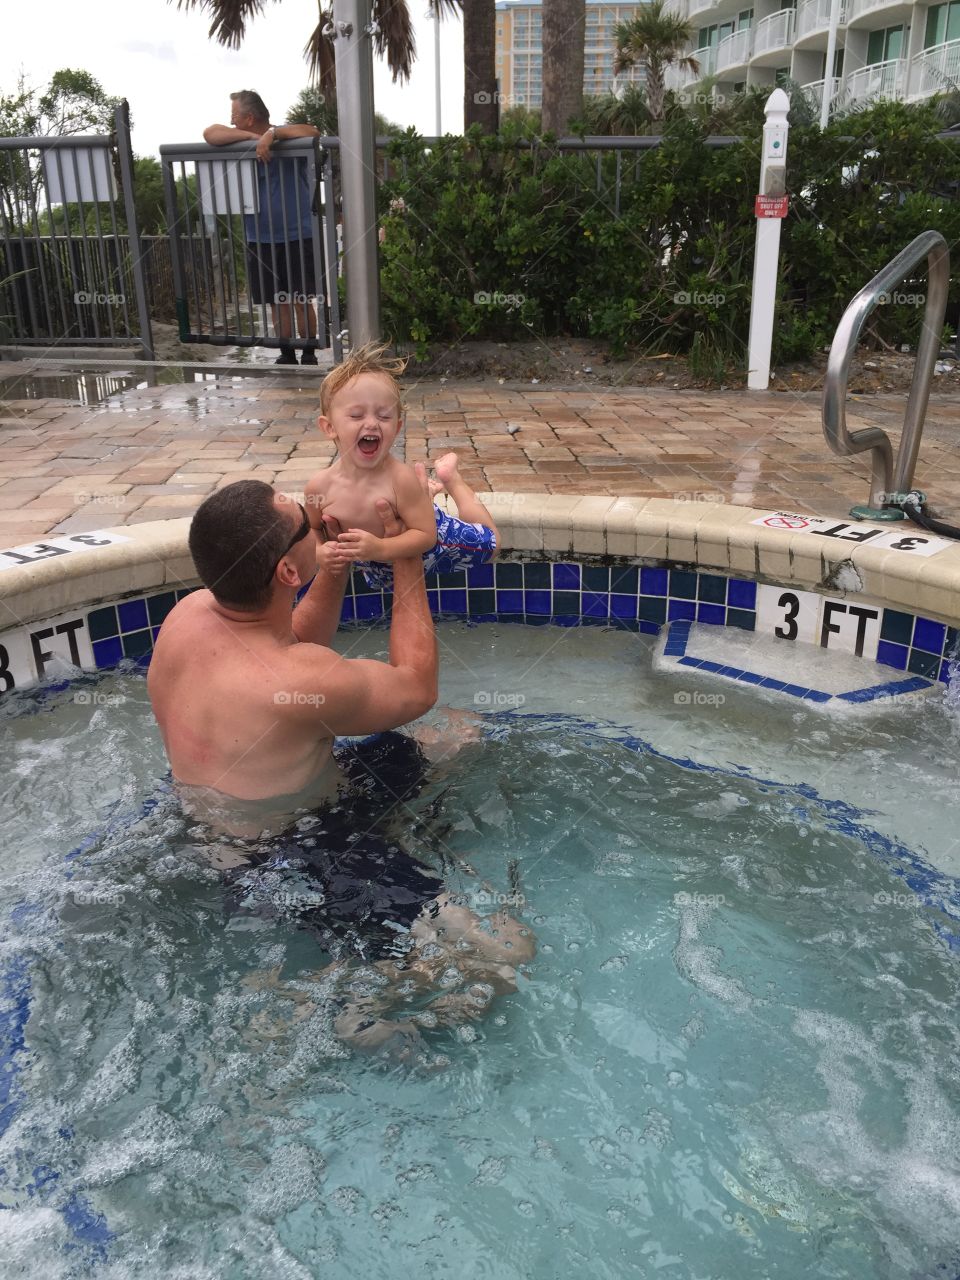 What's more fun than jumping into daddy's arms in the hot tub?